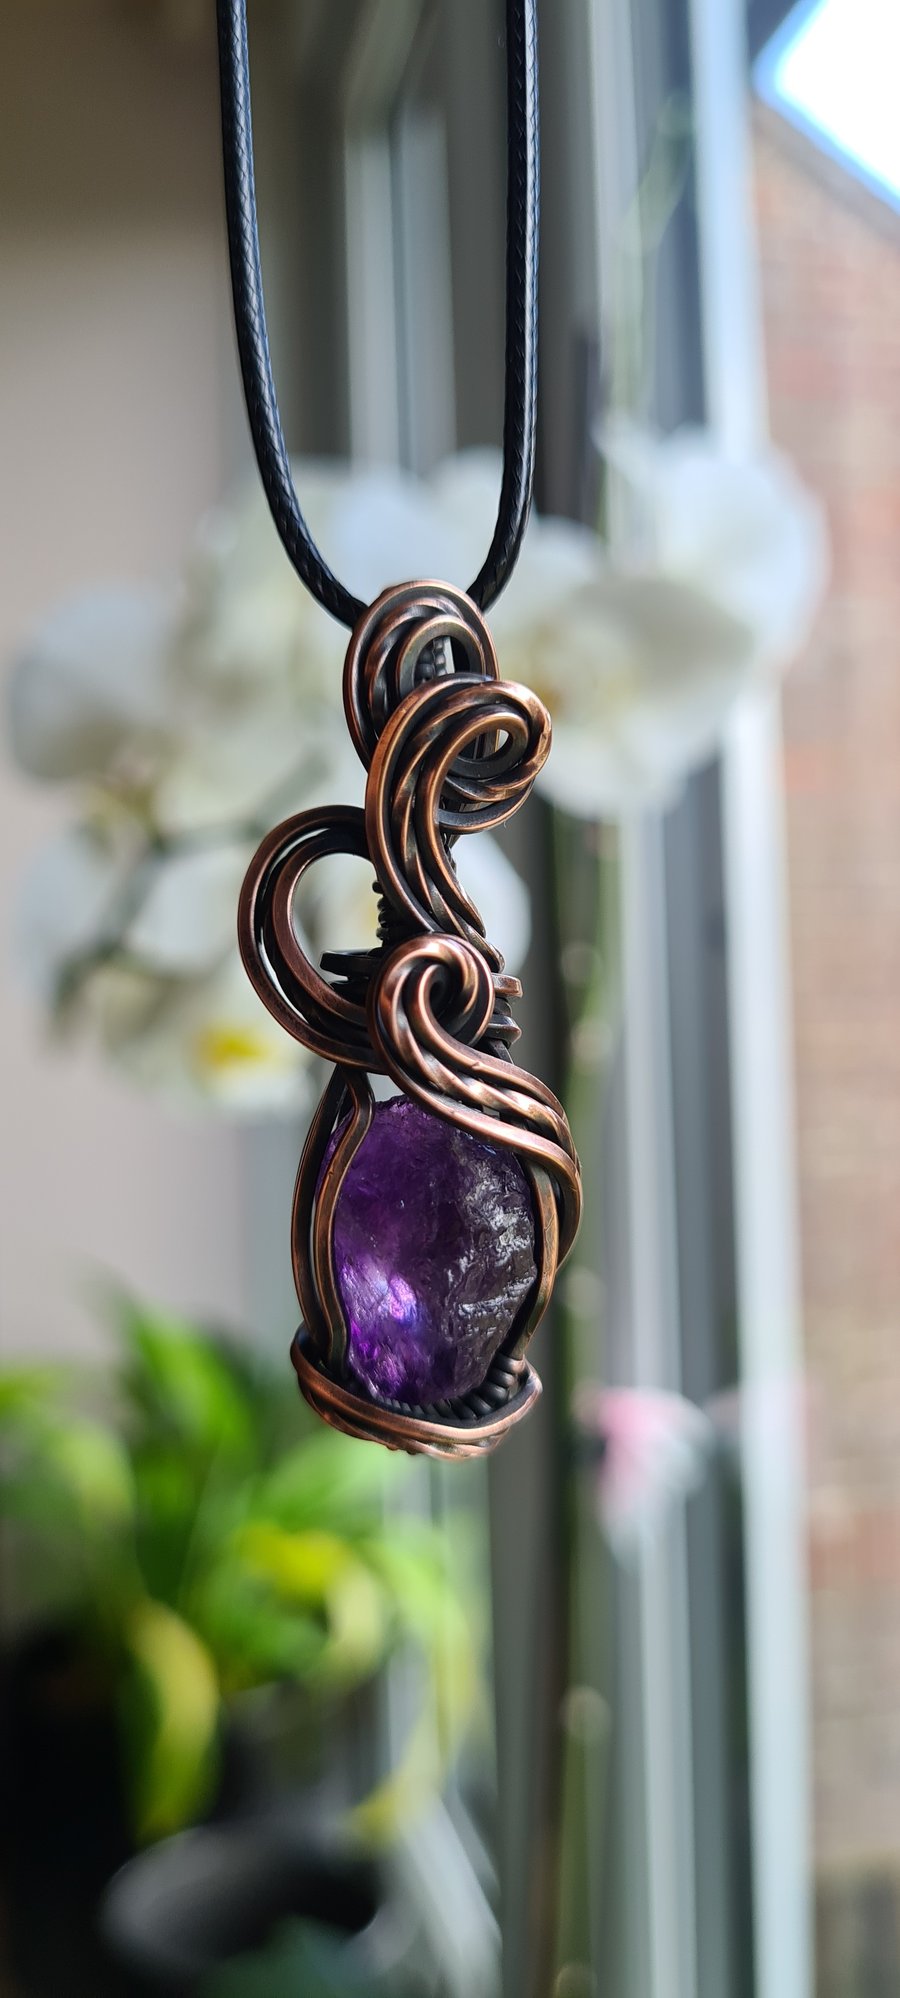 Handmade Natural Raw Rough Cut Amethyst Crystal & Copper Necklace Pendant Gift